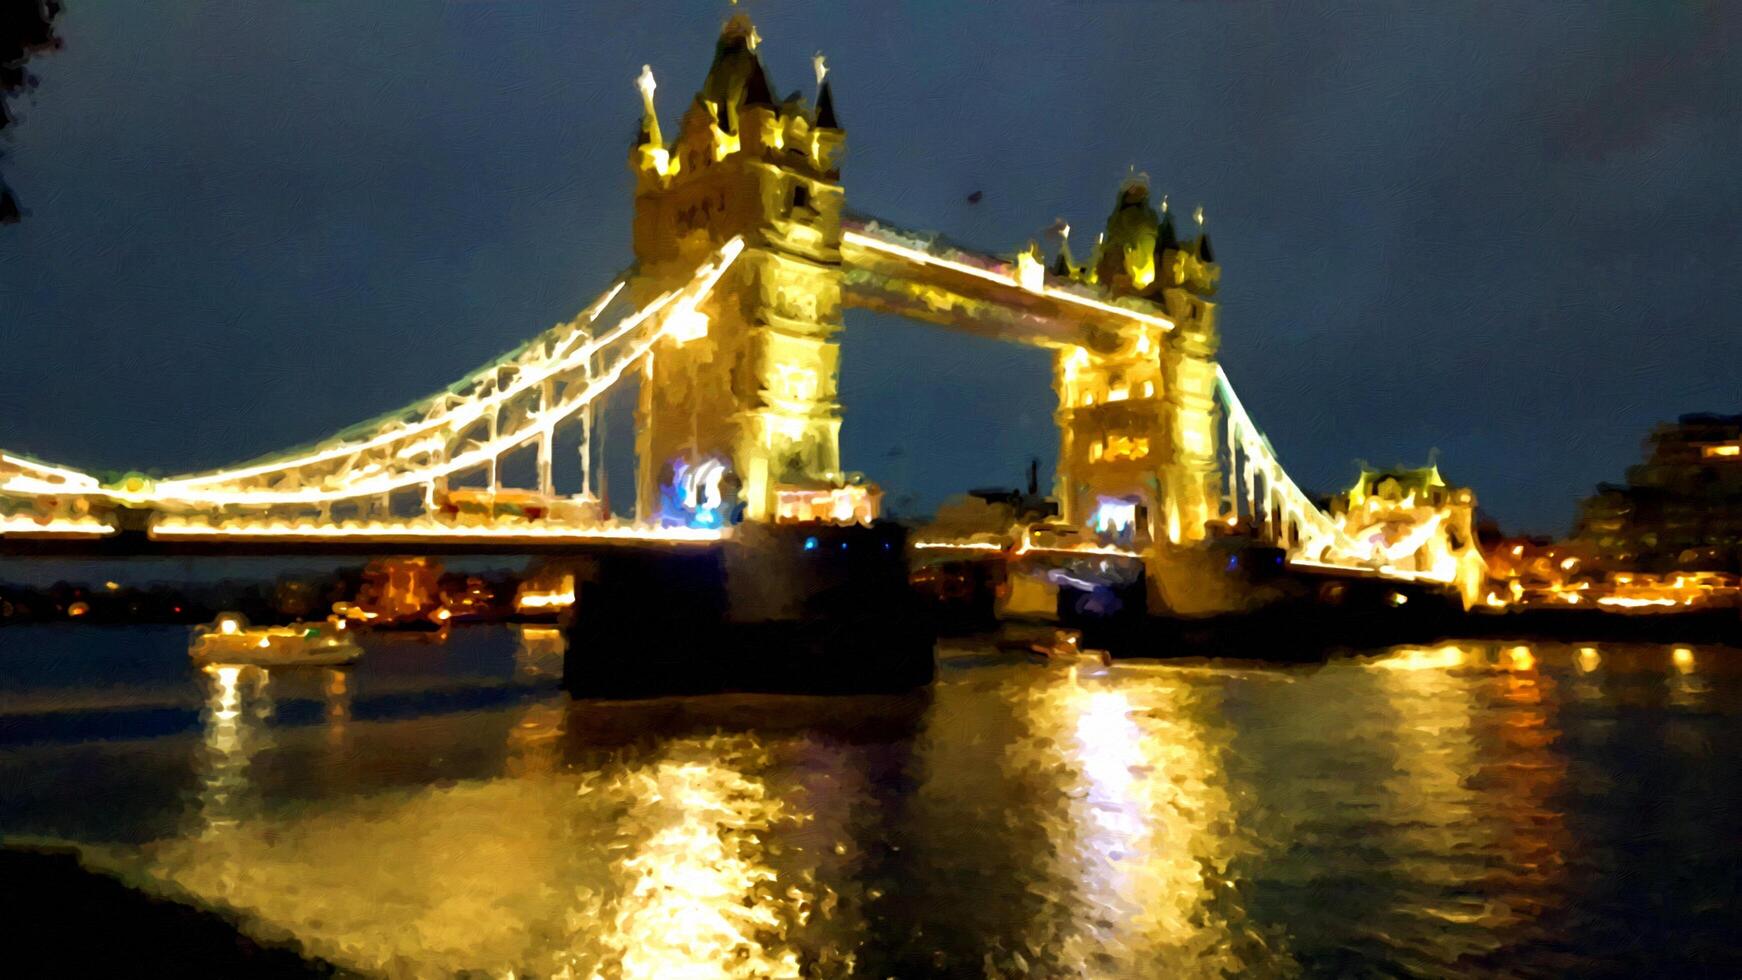 A nocturnal glimpse of the famous London Bridge in England. Digital painting style. photo